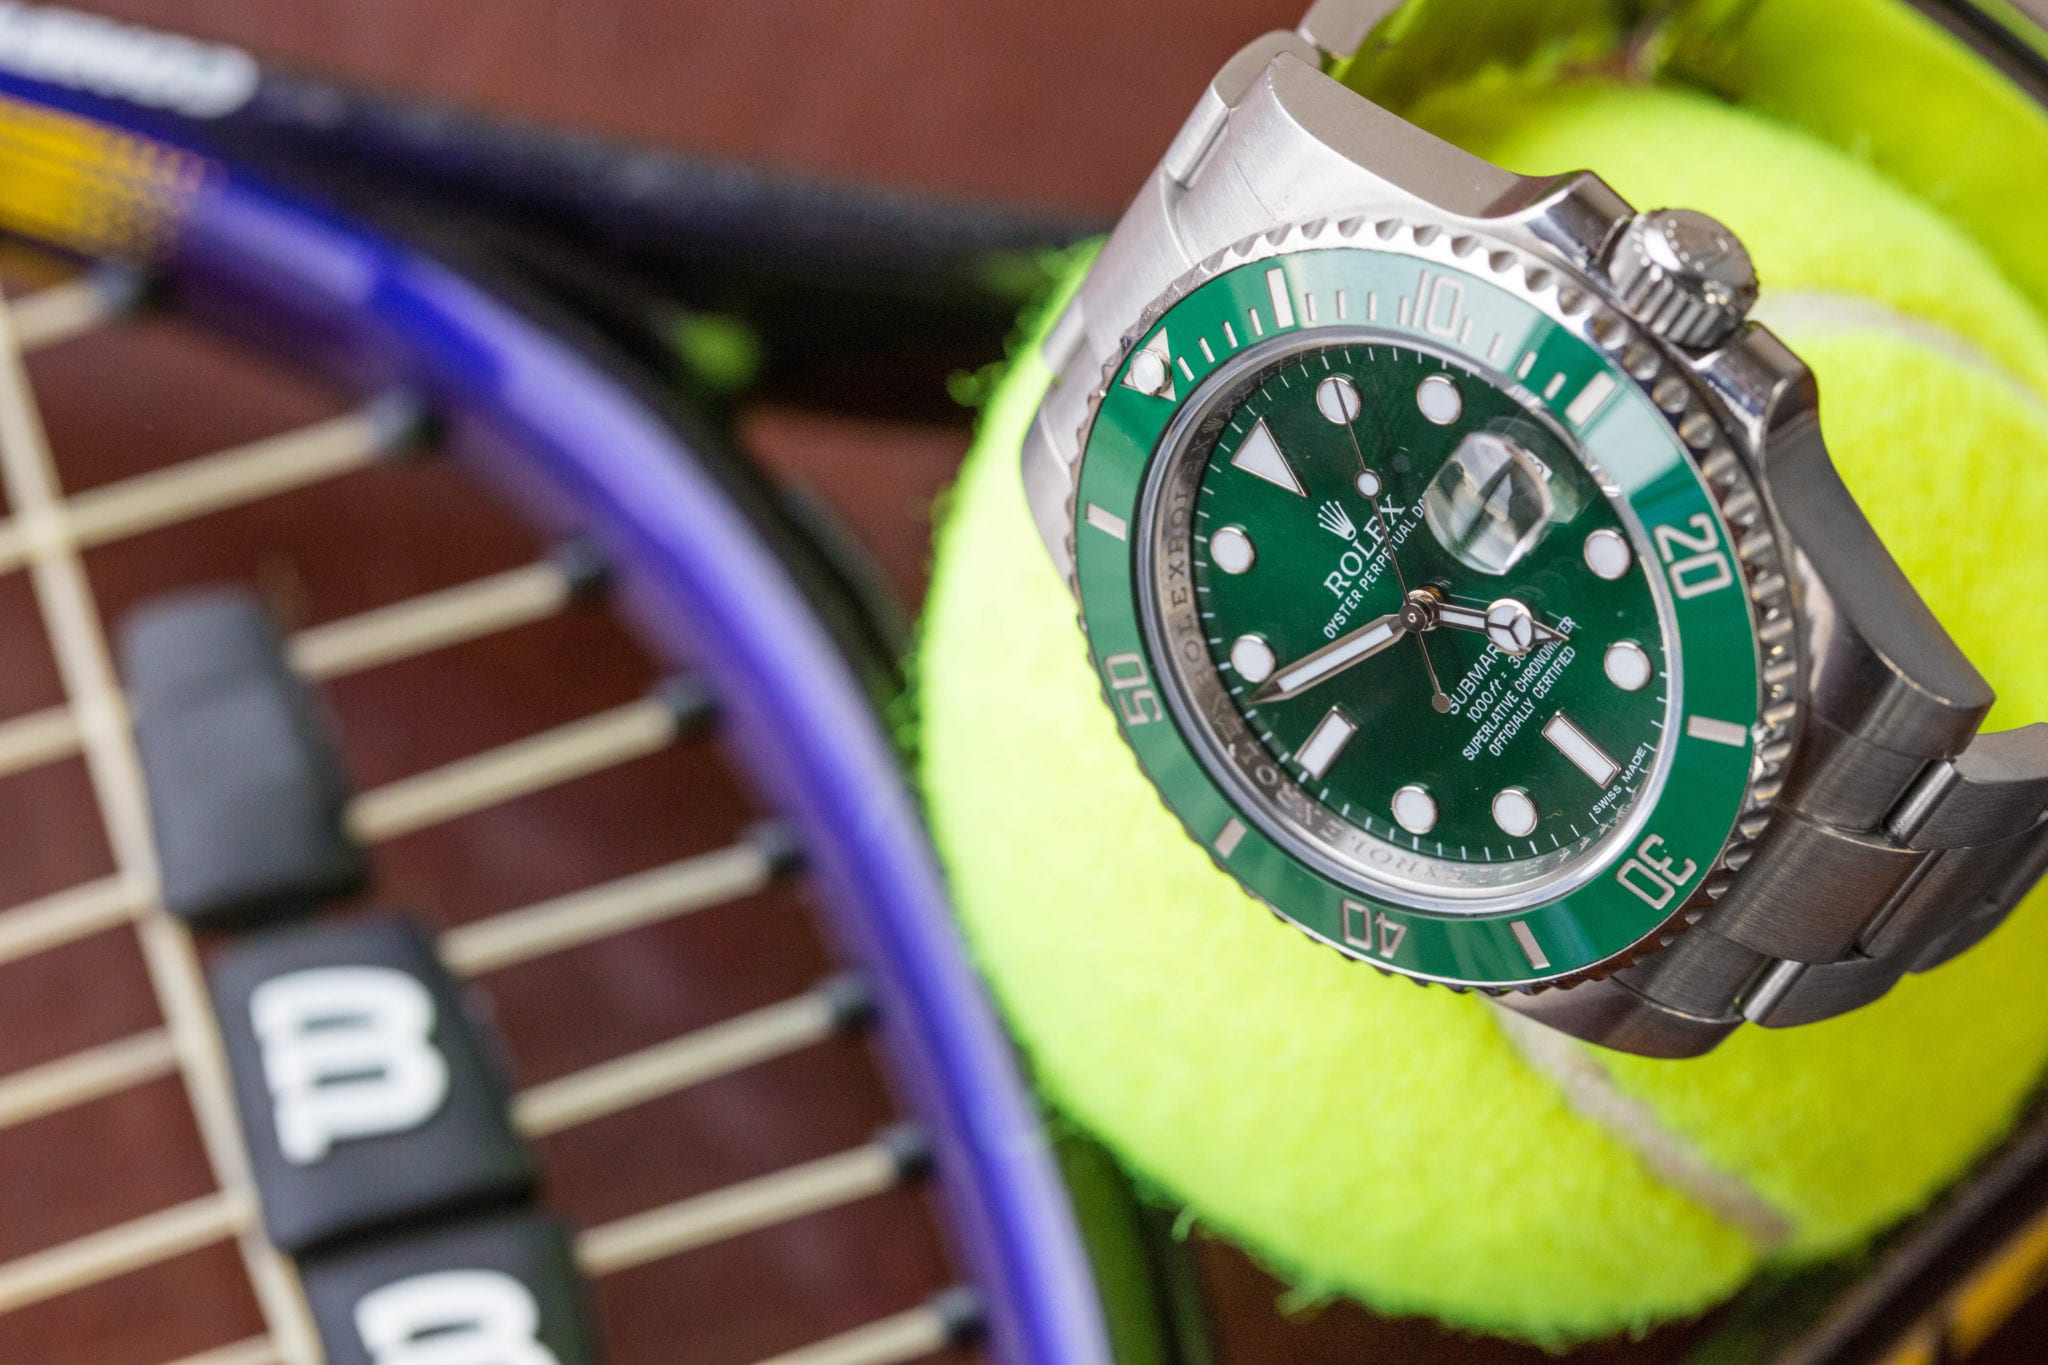 Can I Wear My Watch While Playing Tennis?